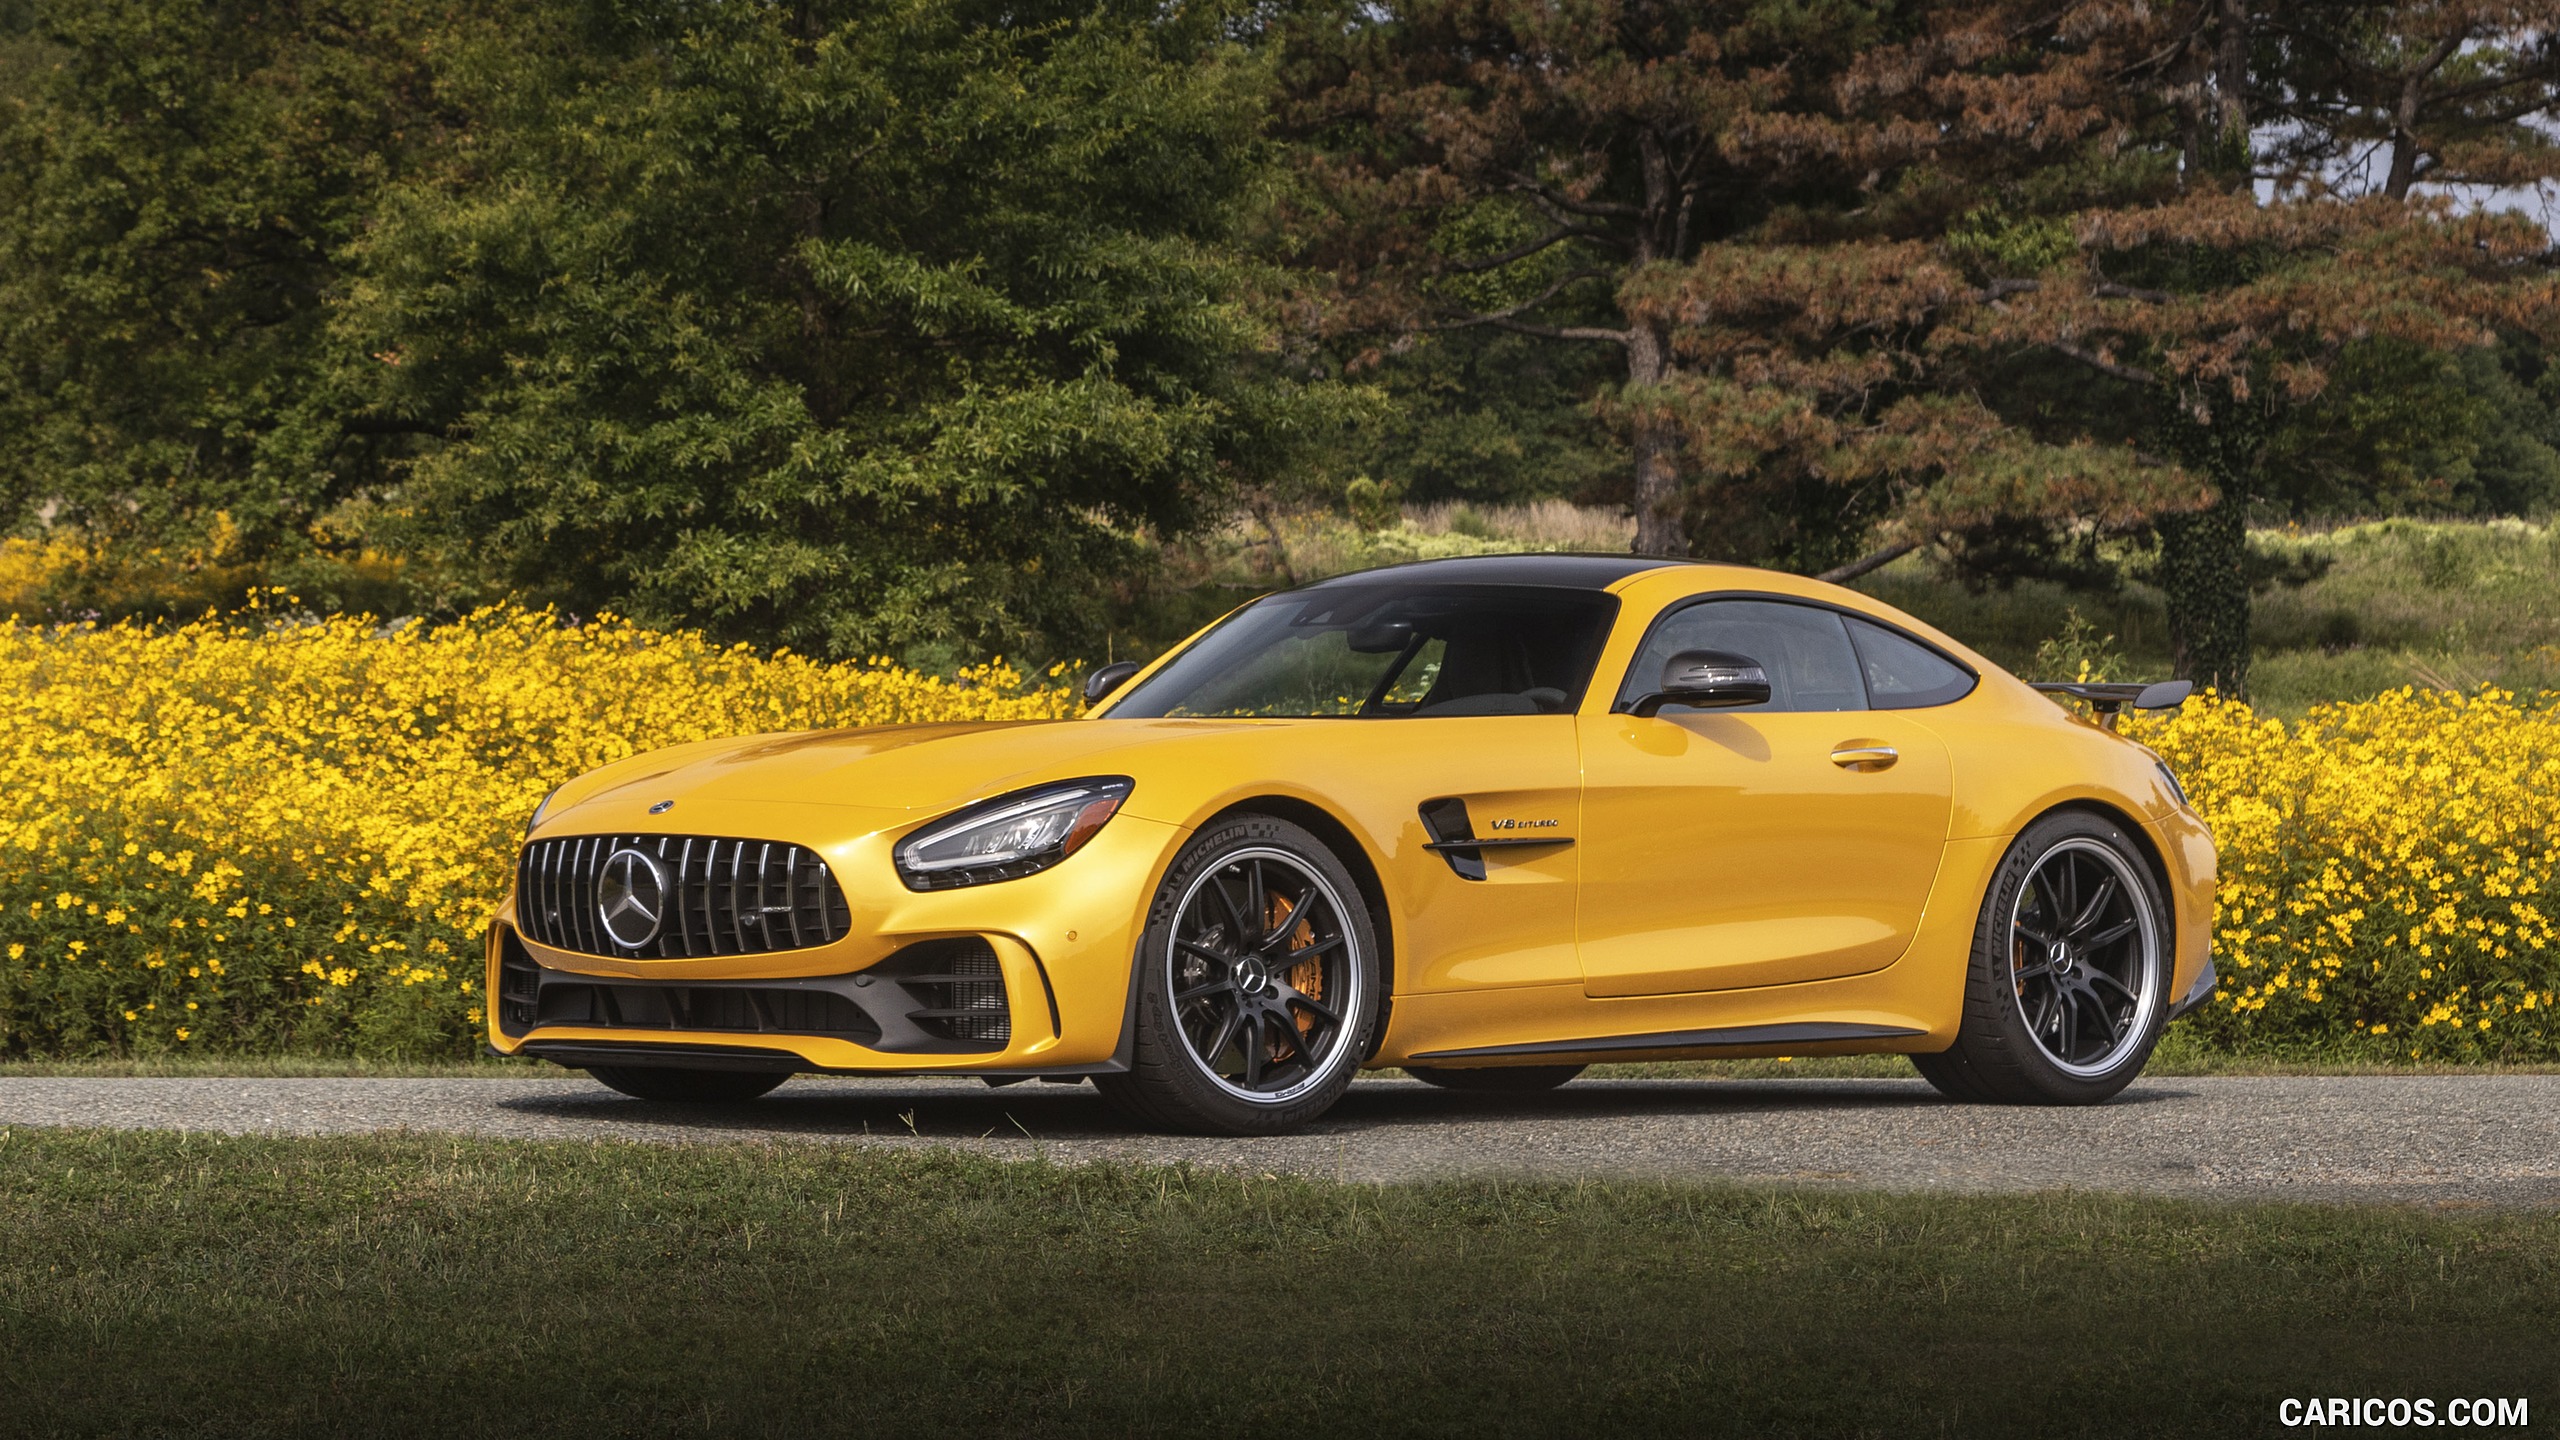 2020 Mercedes-AMG GT R Coupe (US-Spec) - Front Three-Quarter, #281 of 328